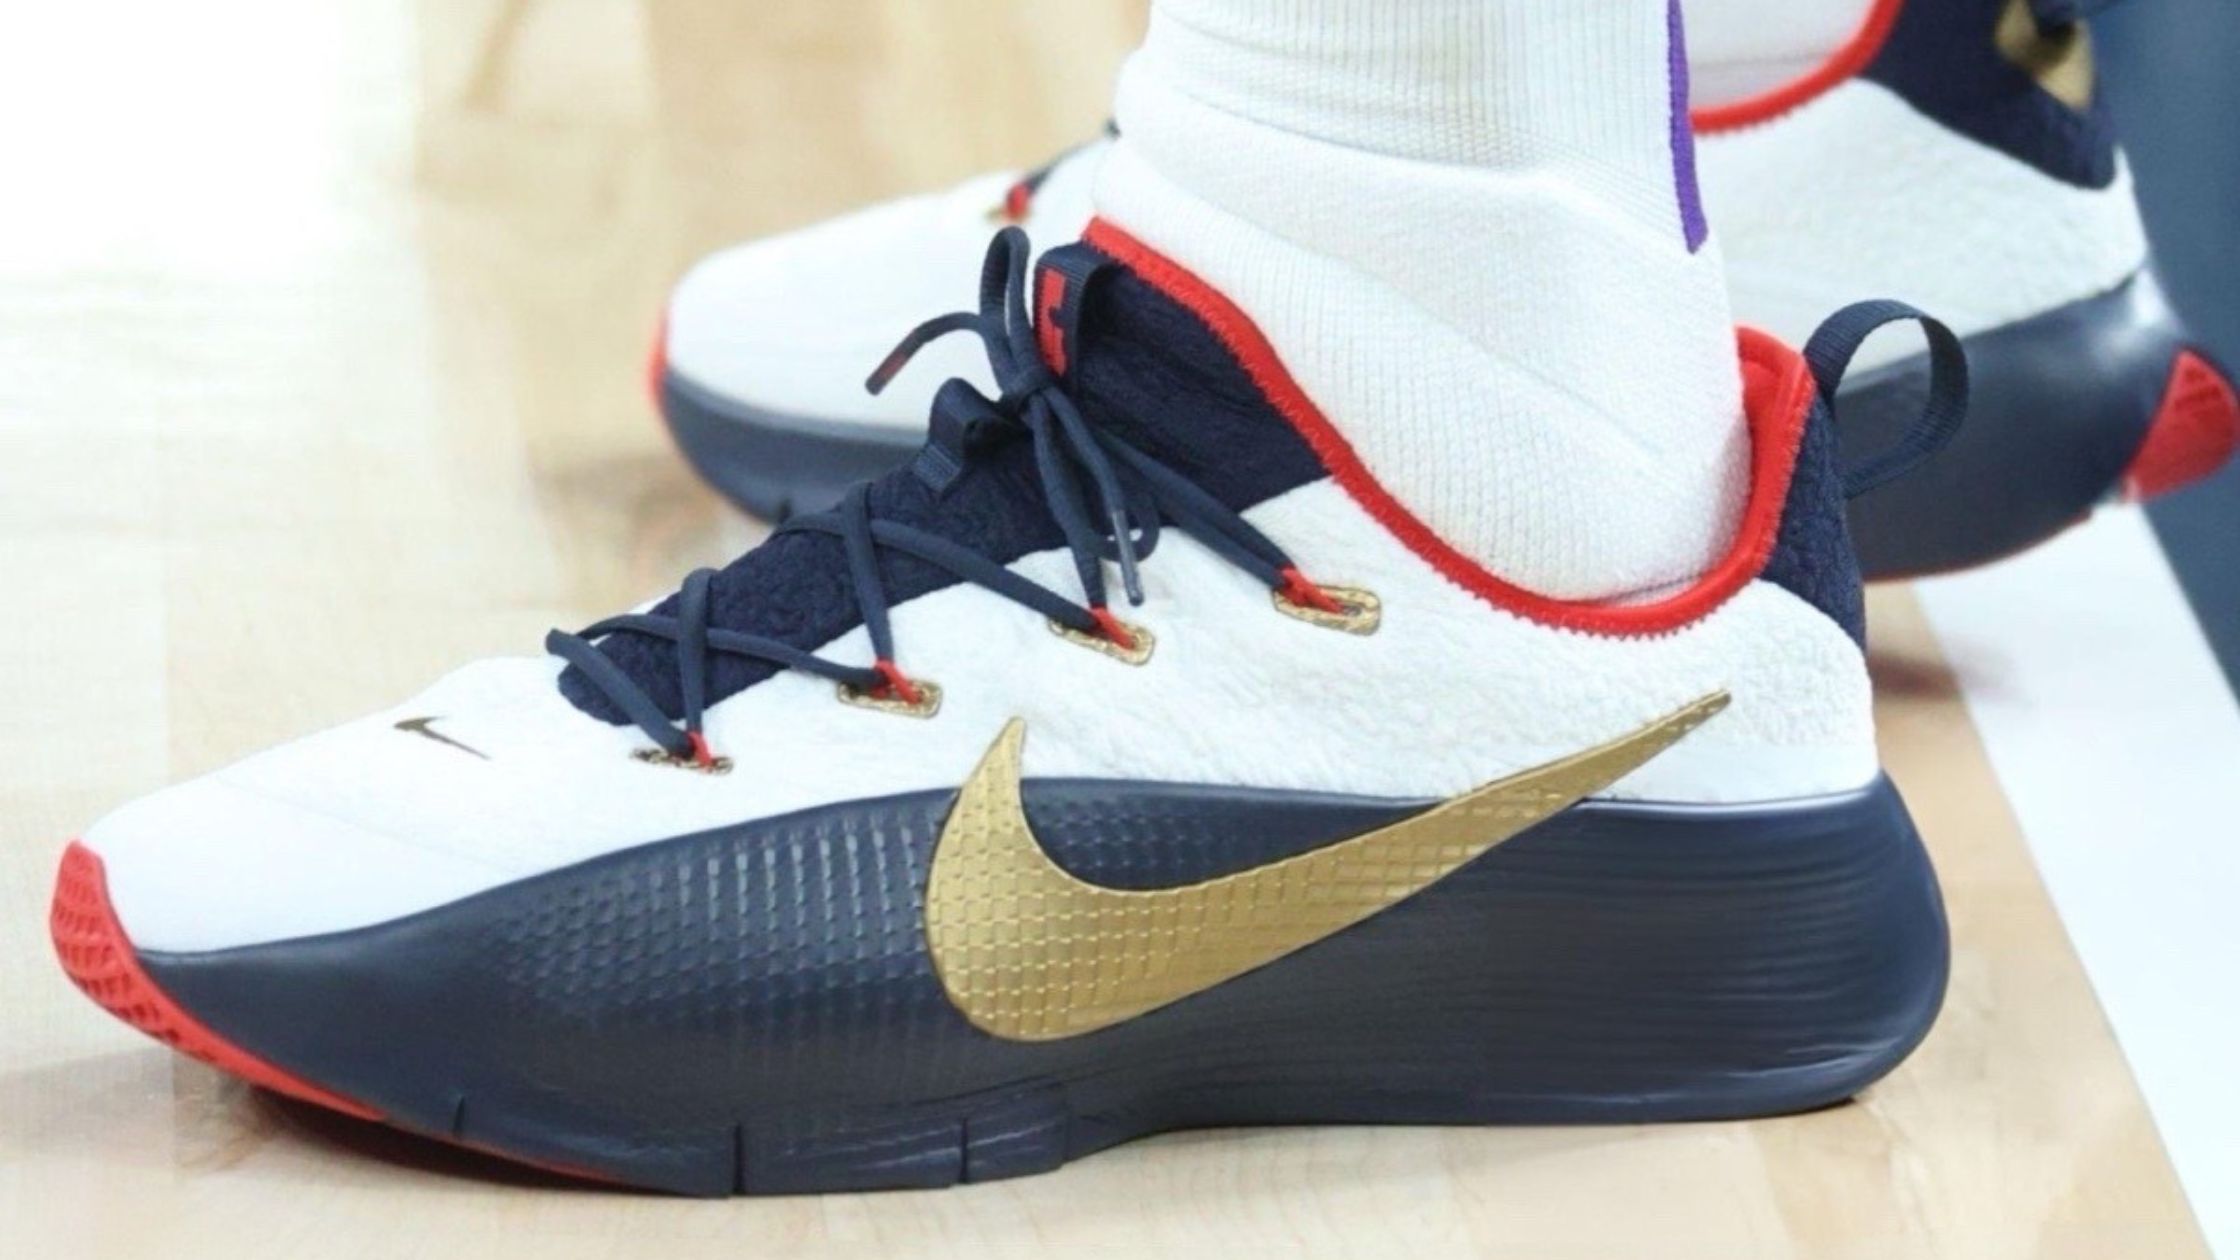 LeBron James Unveils Nike’s New Sneaker: The Royalty TR at Team USA Practice